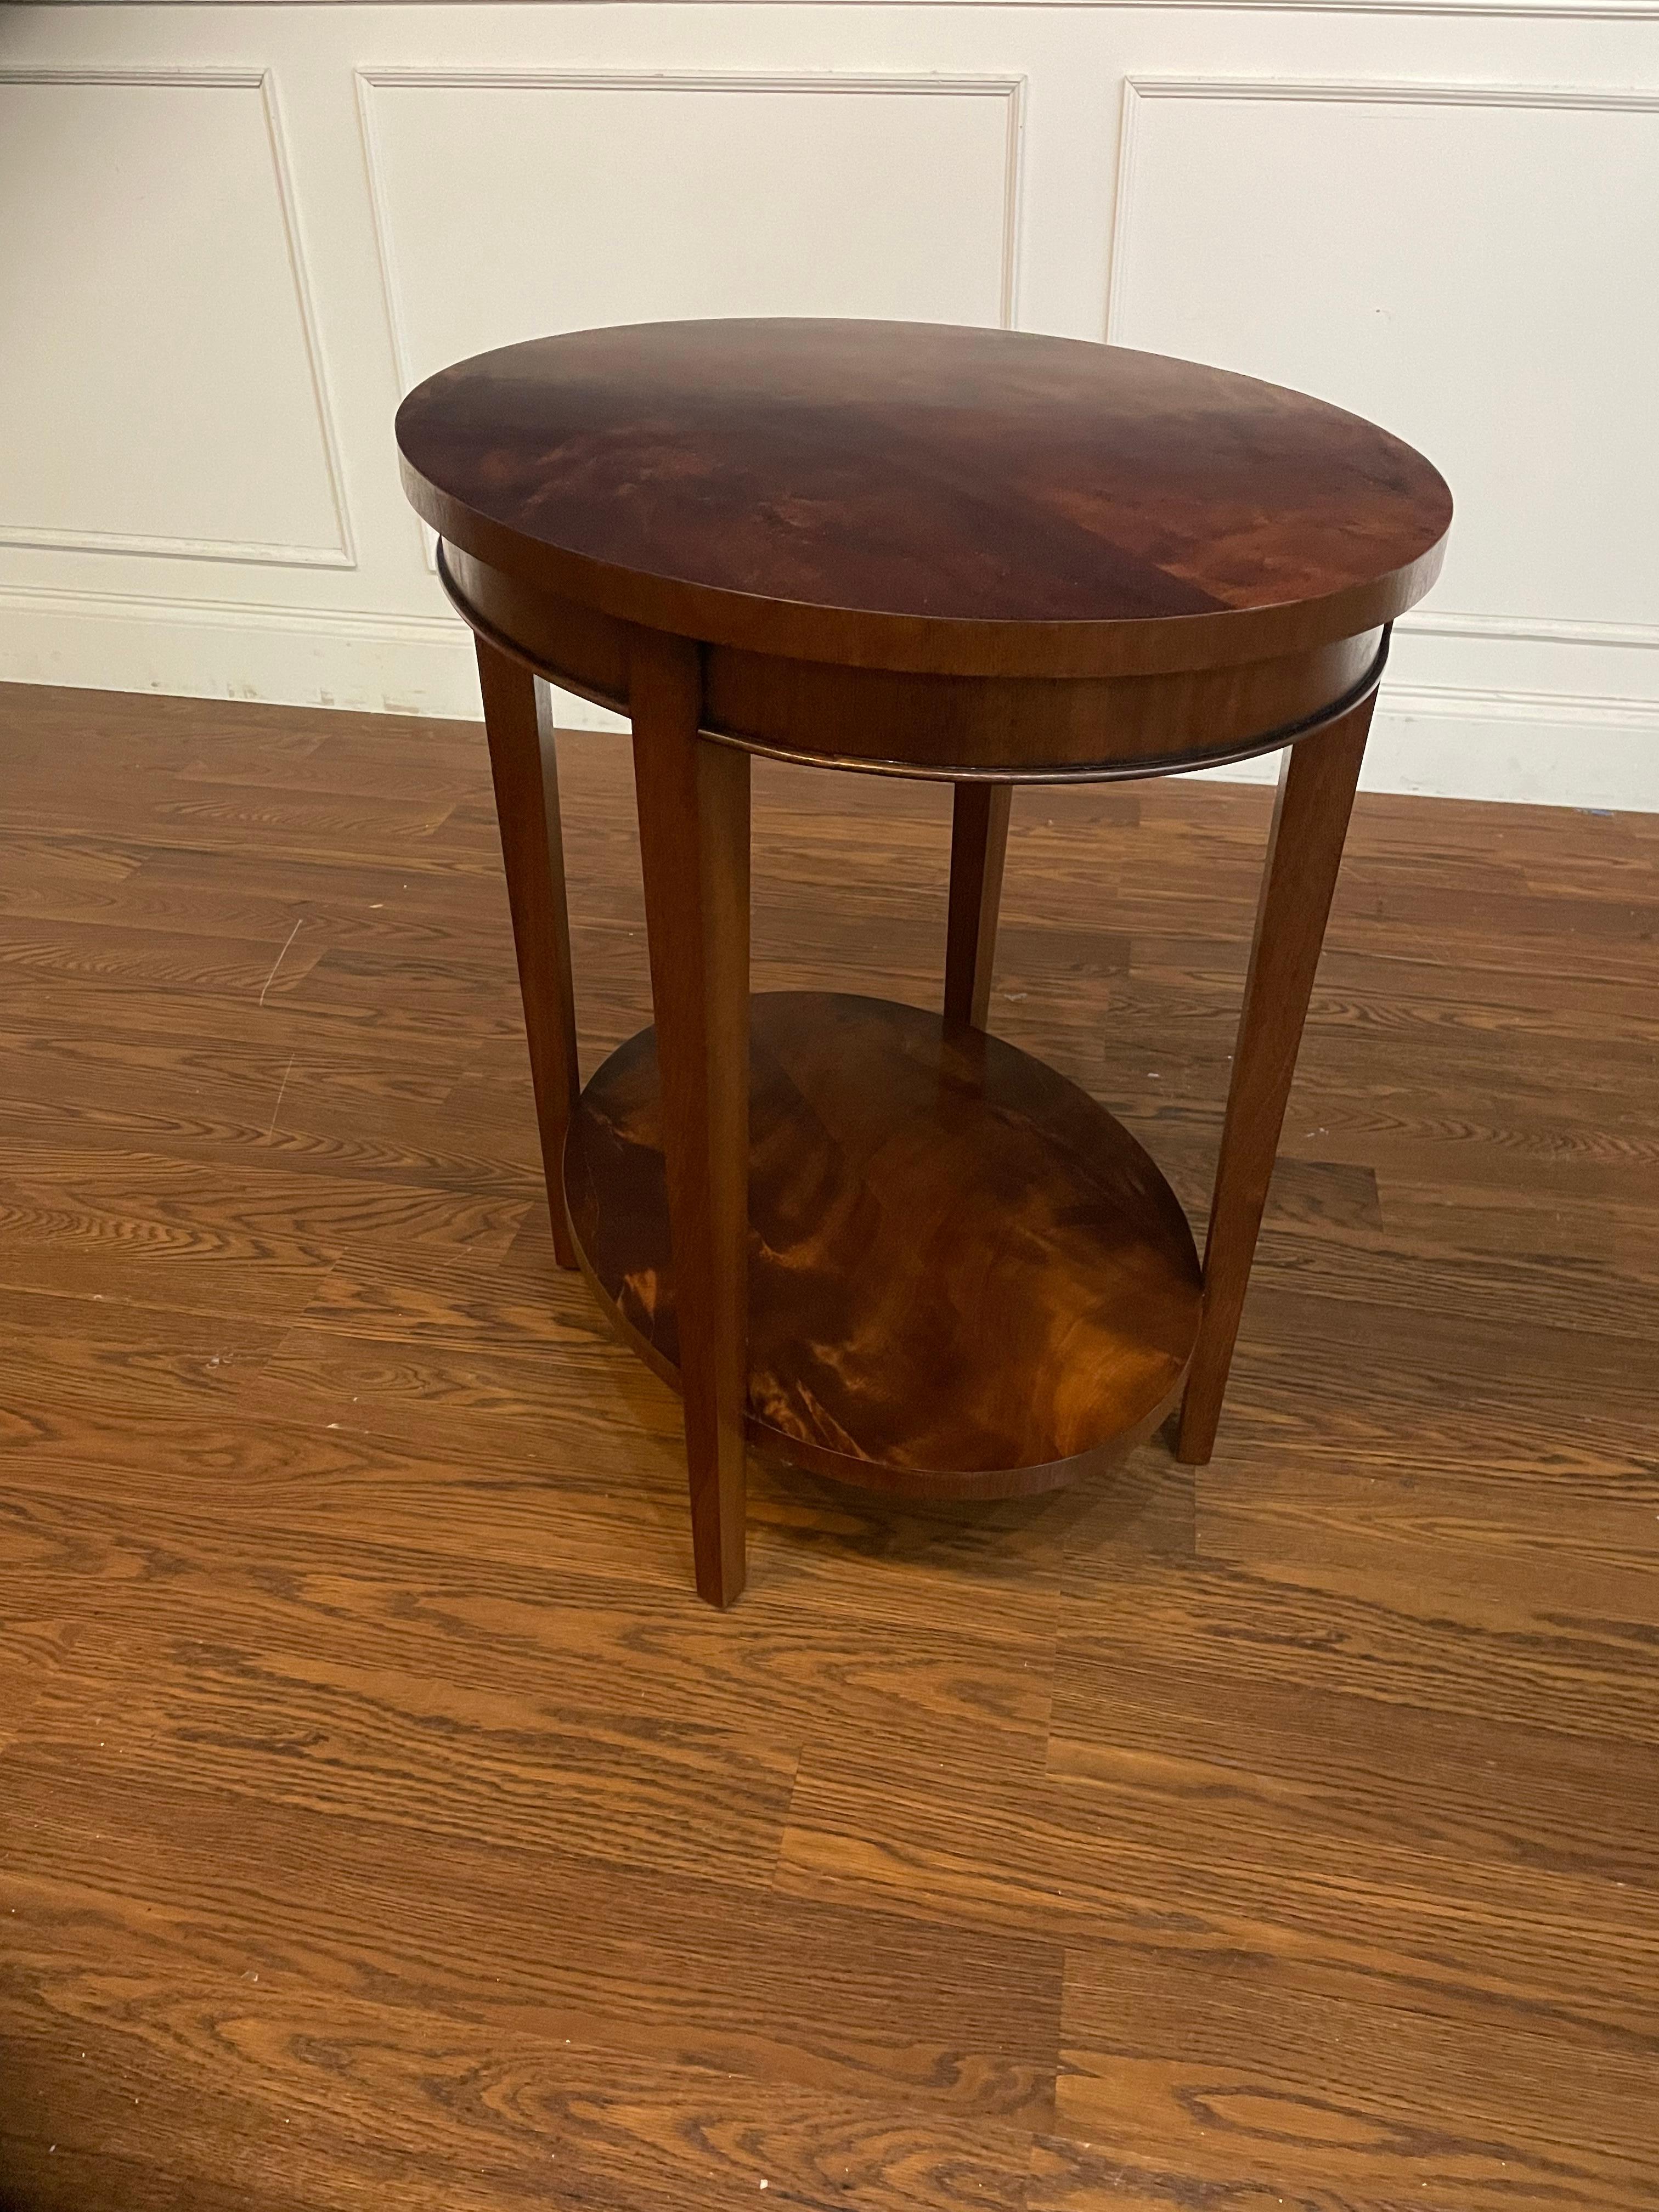 This is an oval Hepplewhite style mahogany side table made to order in our shop in Suwanee, Georgia.  It features classic Hepplewhite styling with square tapered legs.  The top and the lower shelf have a reverse slip match pattern of swirly crotch